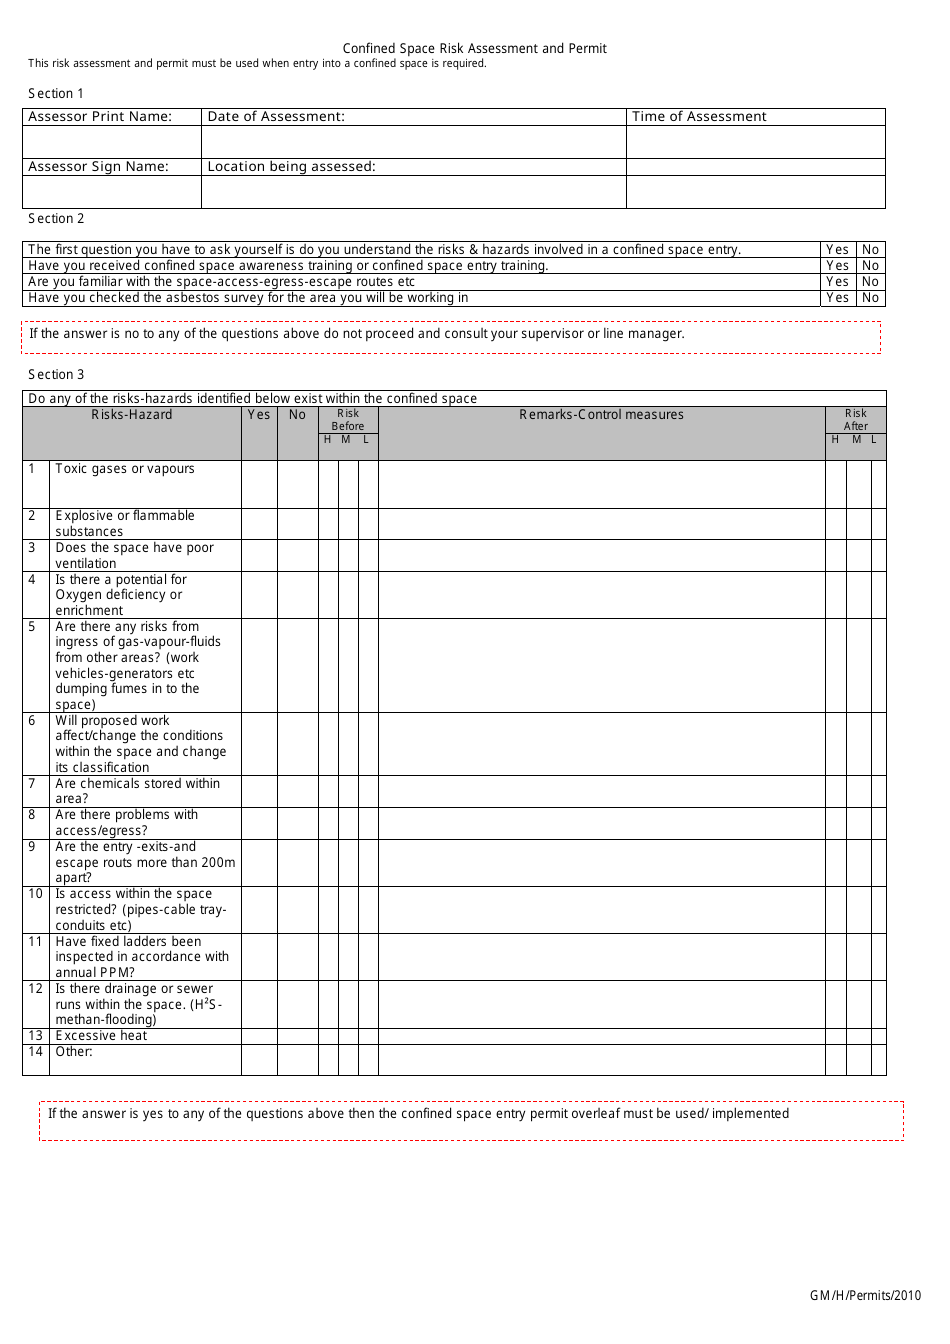 Confined Space Risk Assessment And Permit Form Fill Out Sign Online